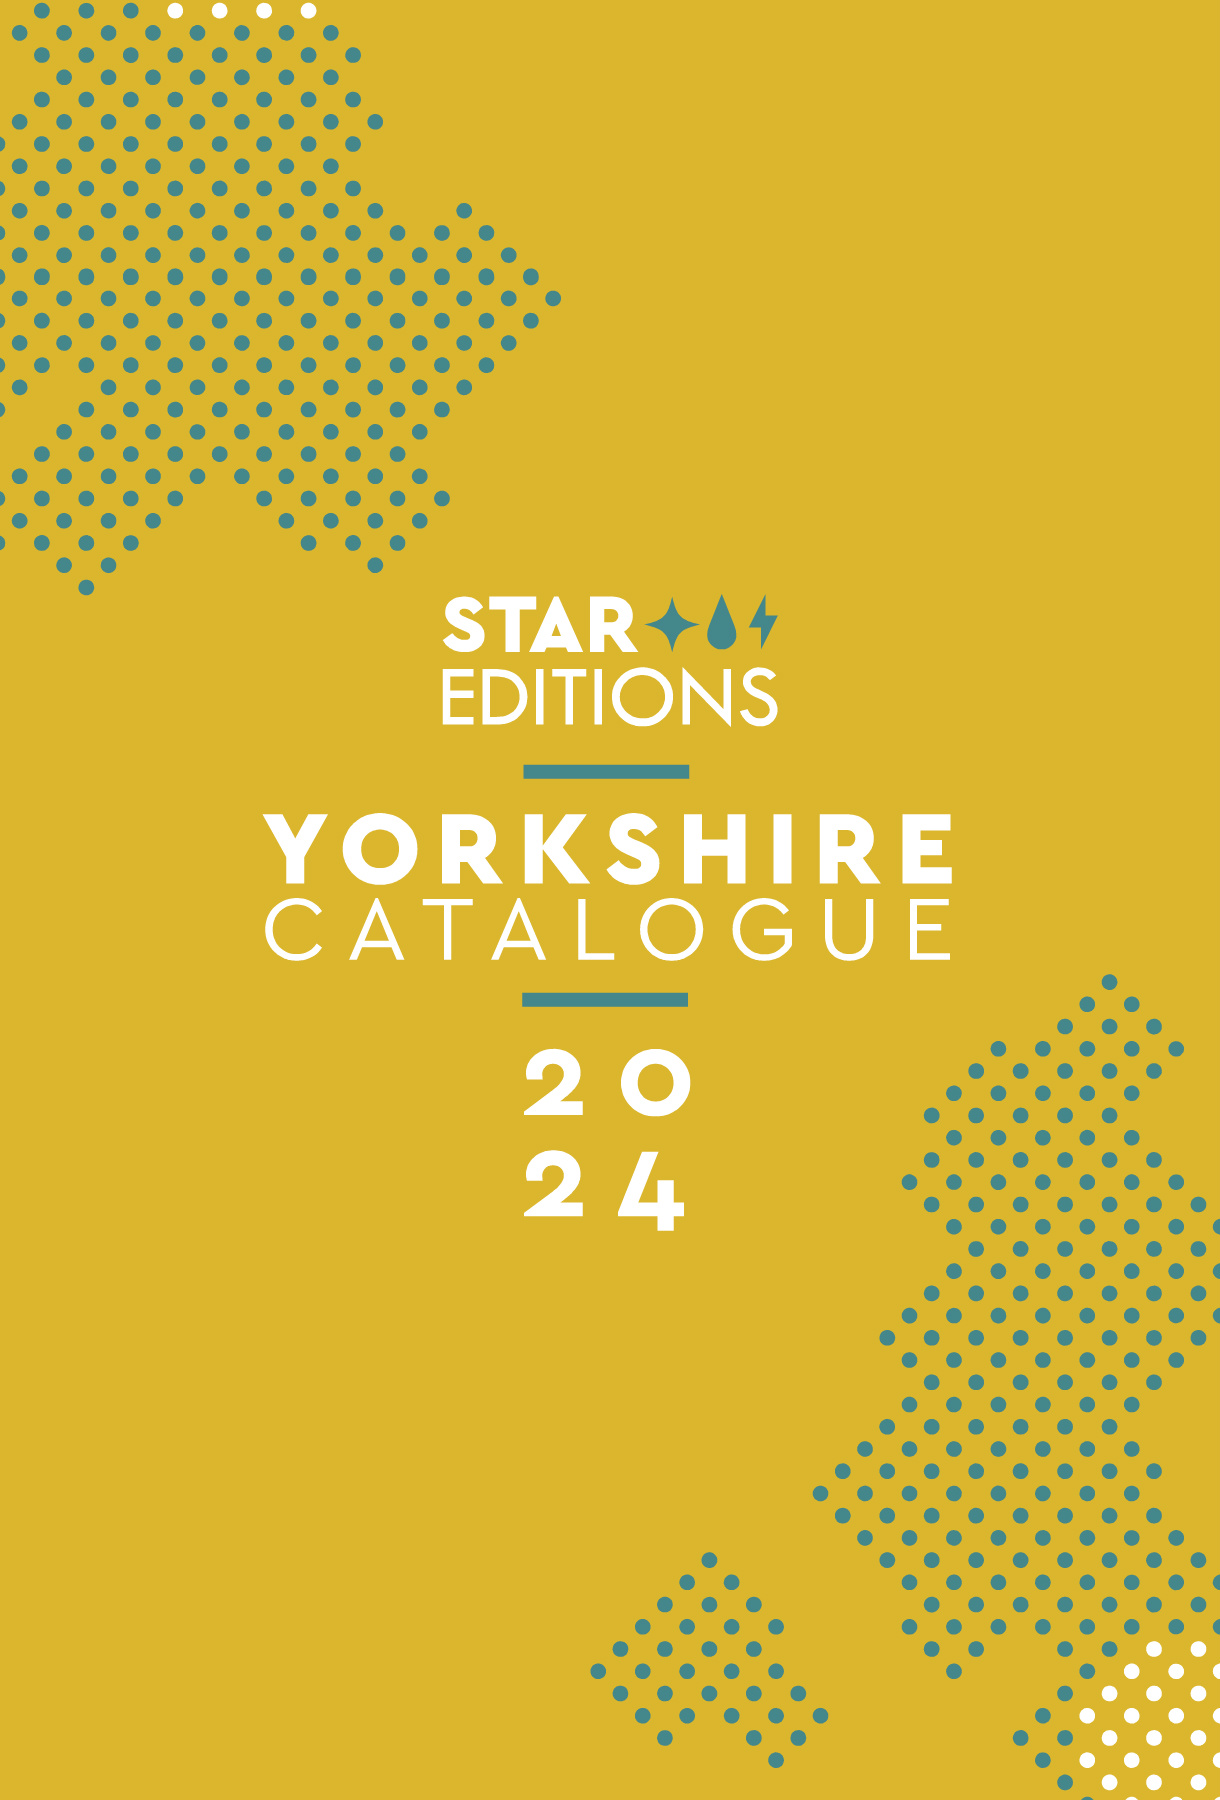 Star Editions yorkshire Product Catalogue